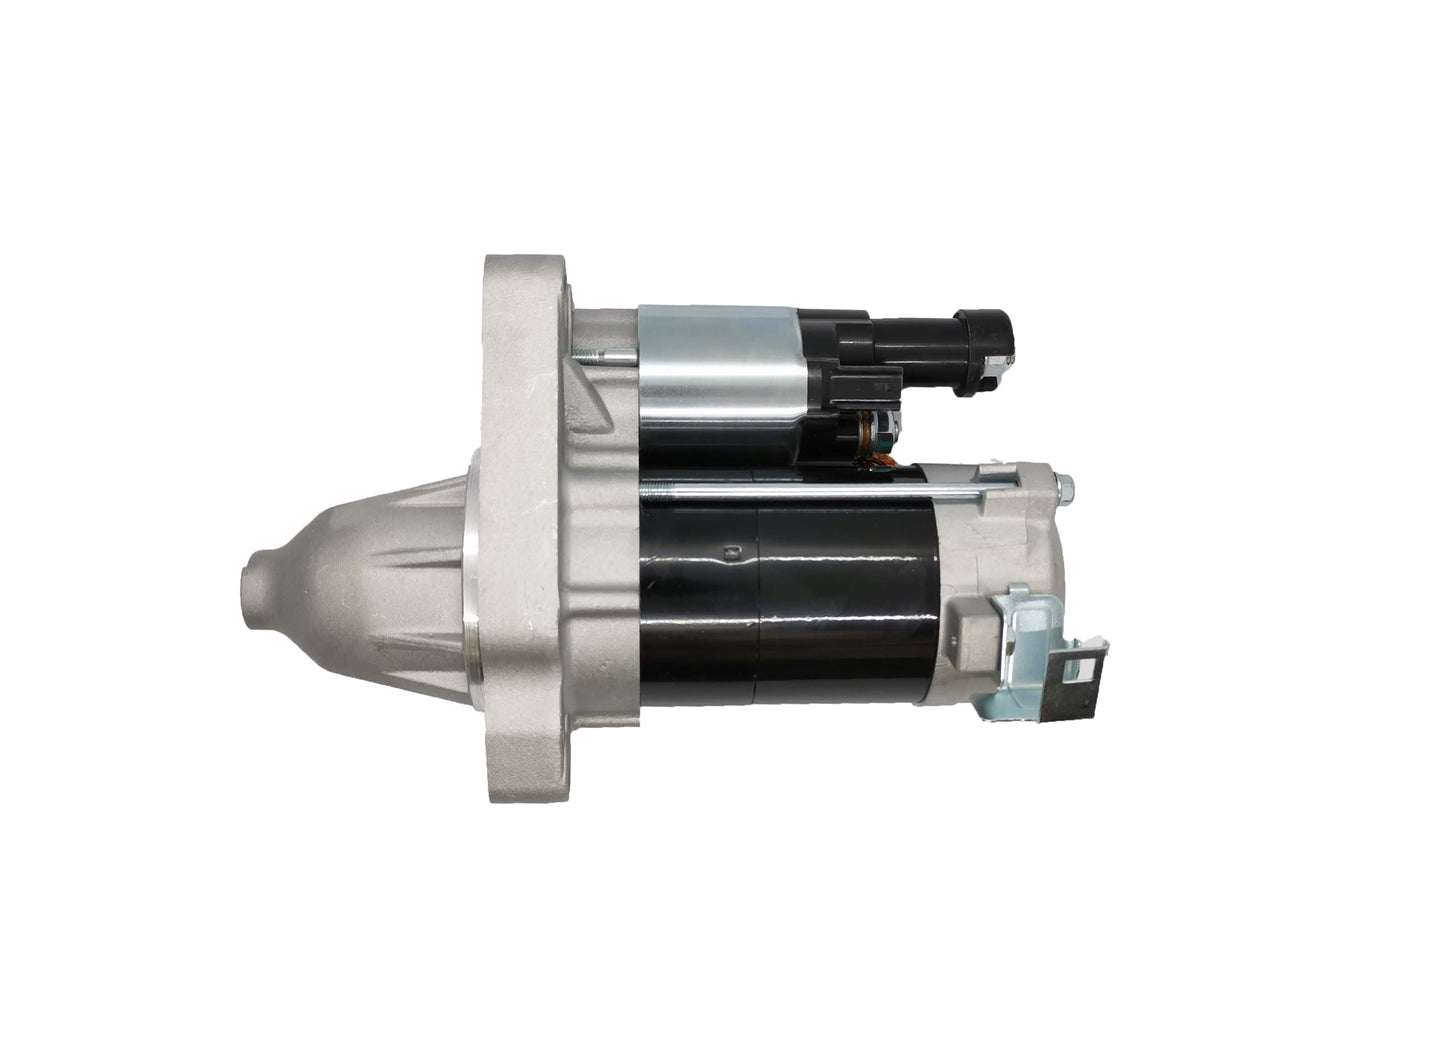 Starter Motor for Honda Civic FD 1.8L R18A  Auto Only 2006 - 2011 (Express Post)